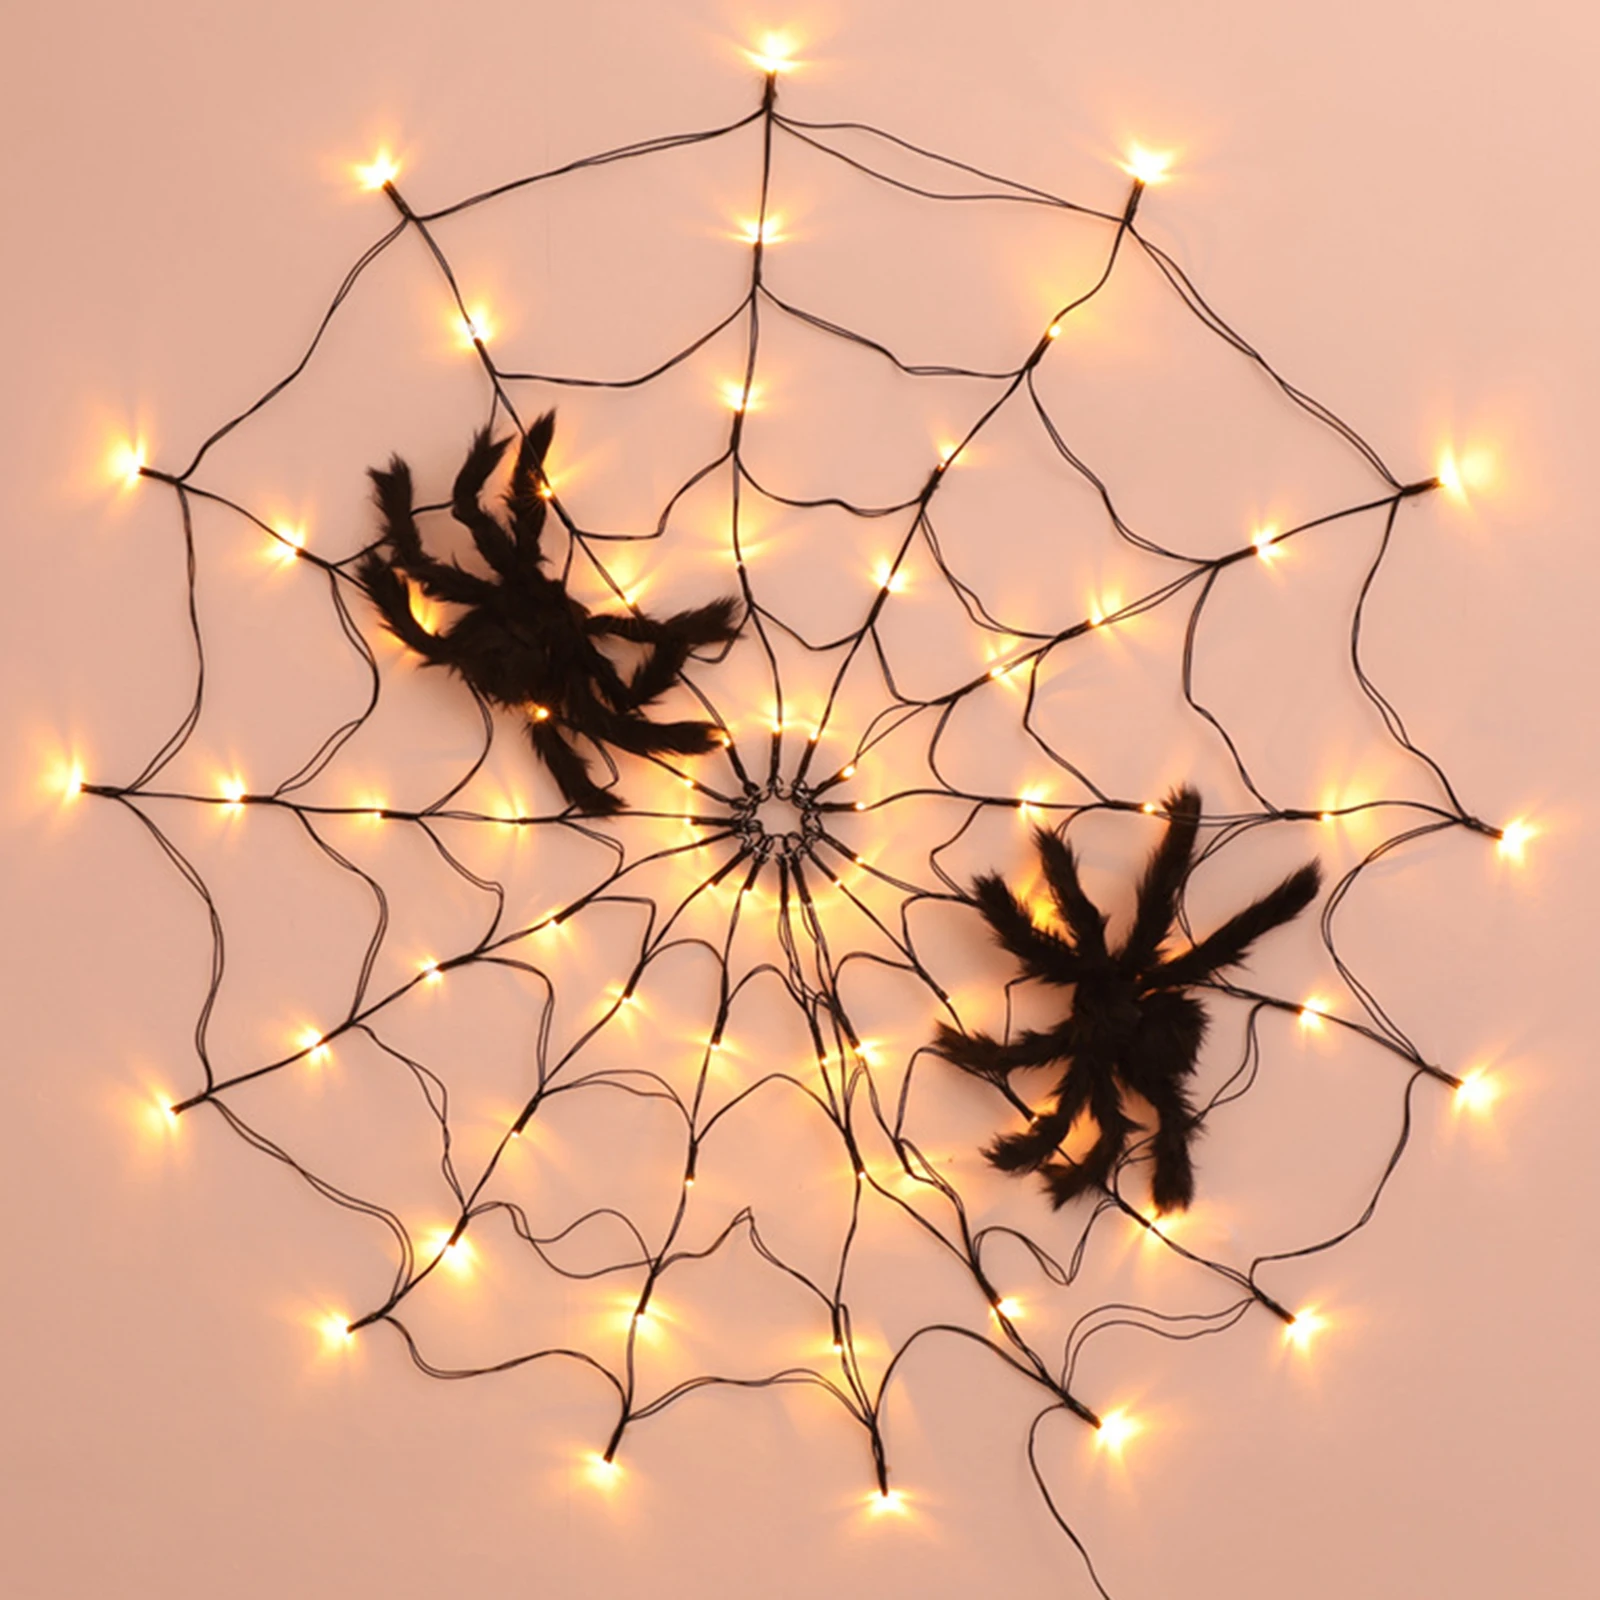 Details about   Halloween LED Fairy Lights 20 Spiders/Decorative lighting for interior and exterior/PART show original title 